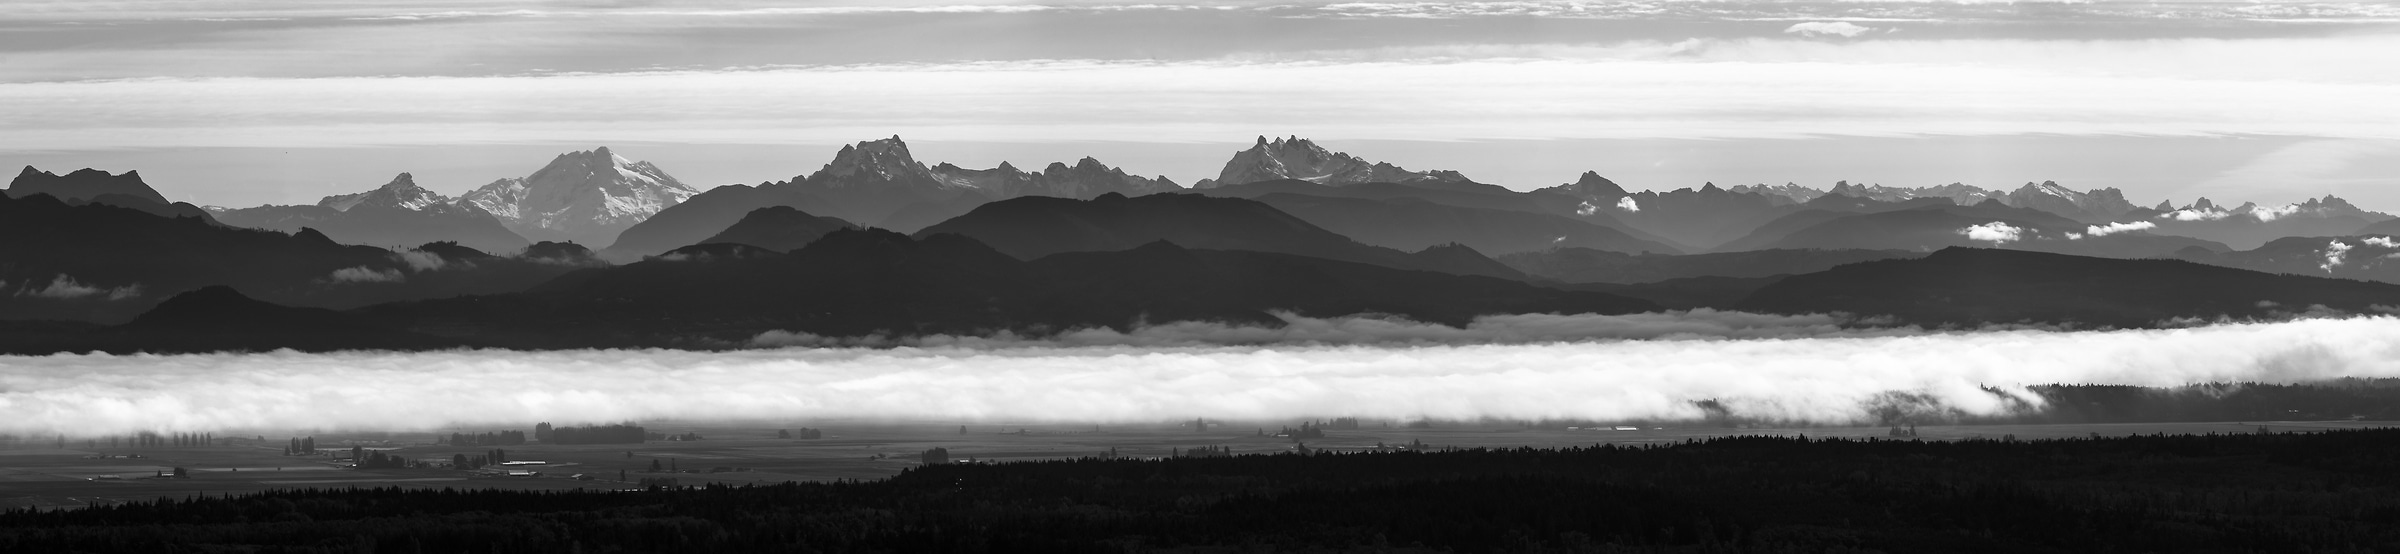 132 megapixels! A very high resolution, large-format VAST photo print of the North Cascade Mountains and Skagit Valley; fine art landscape photo created by Scott Rinckenberger in Washington